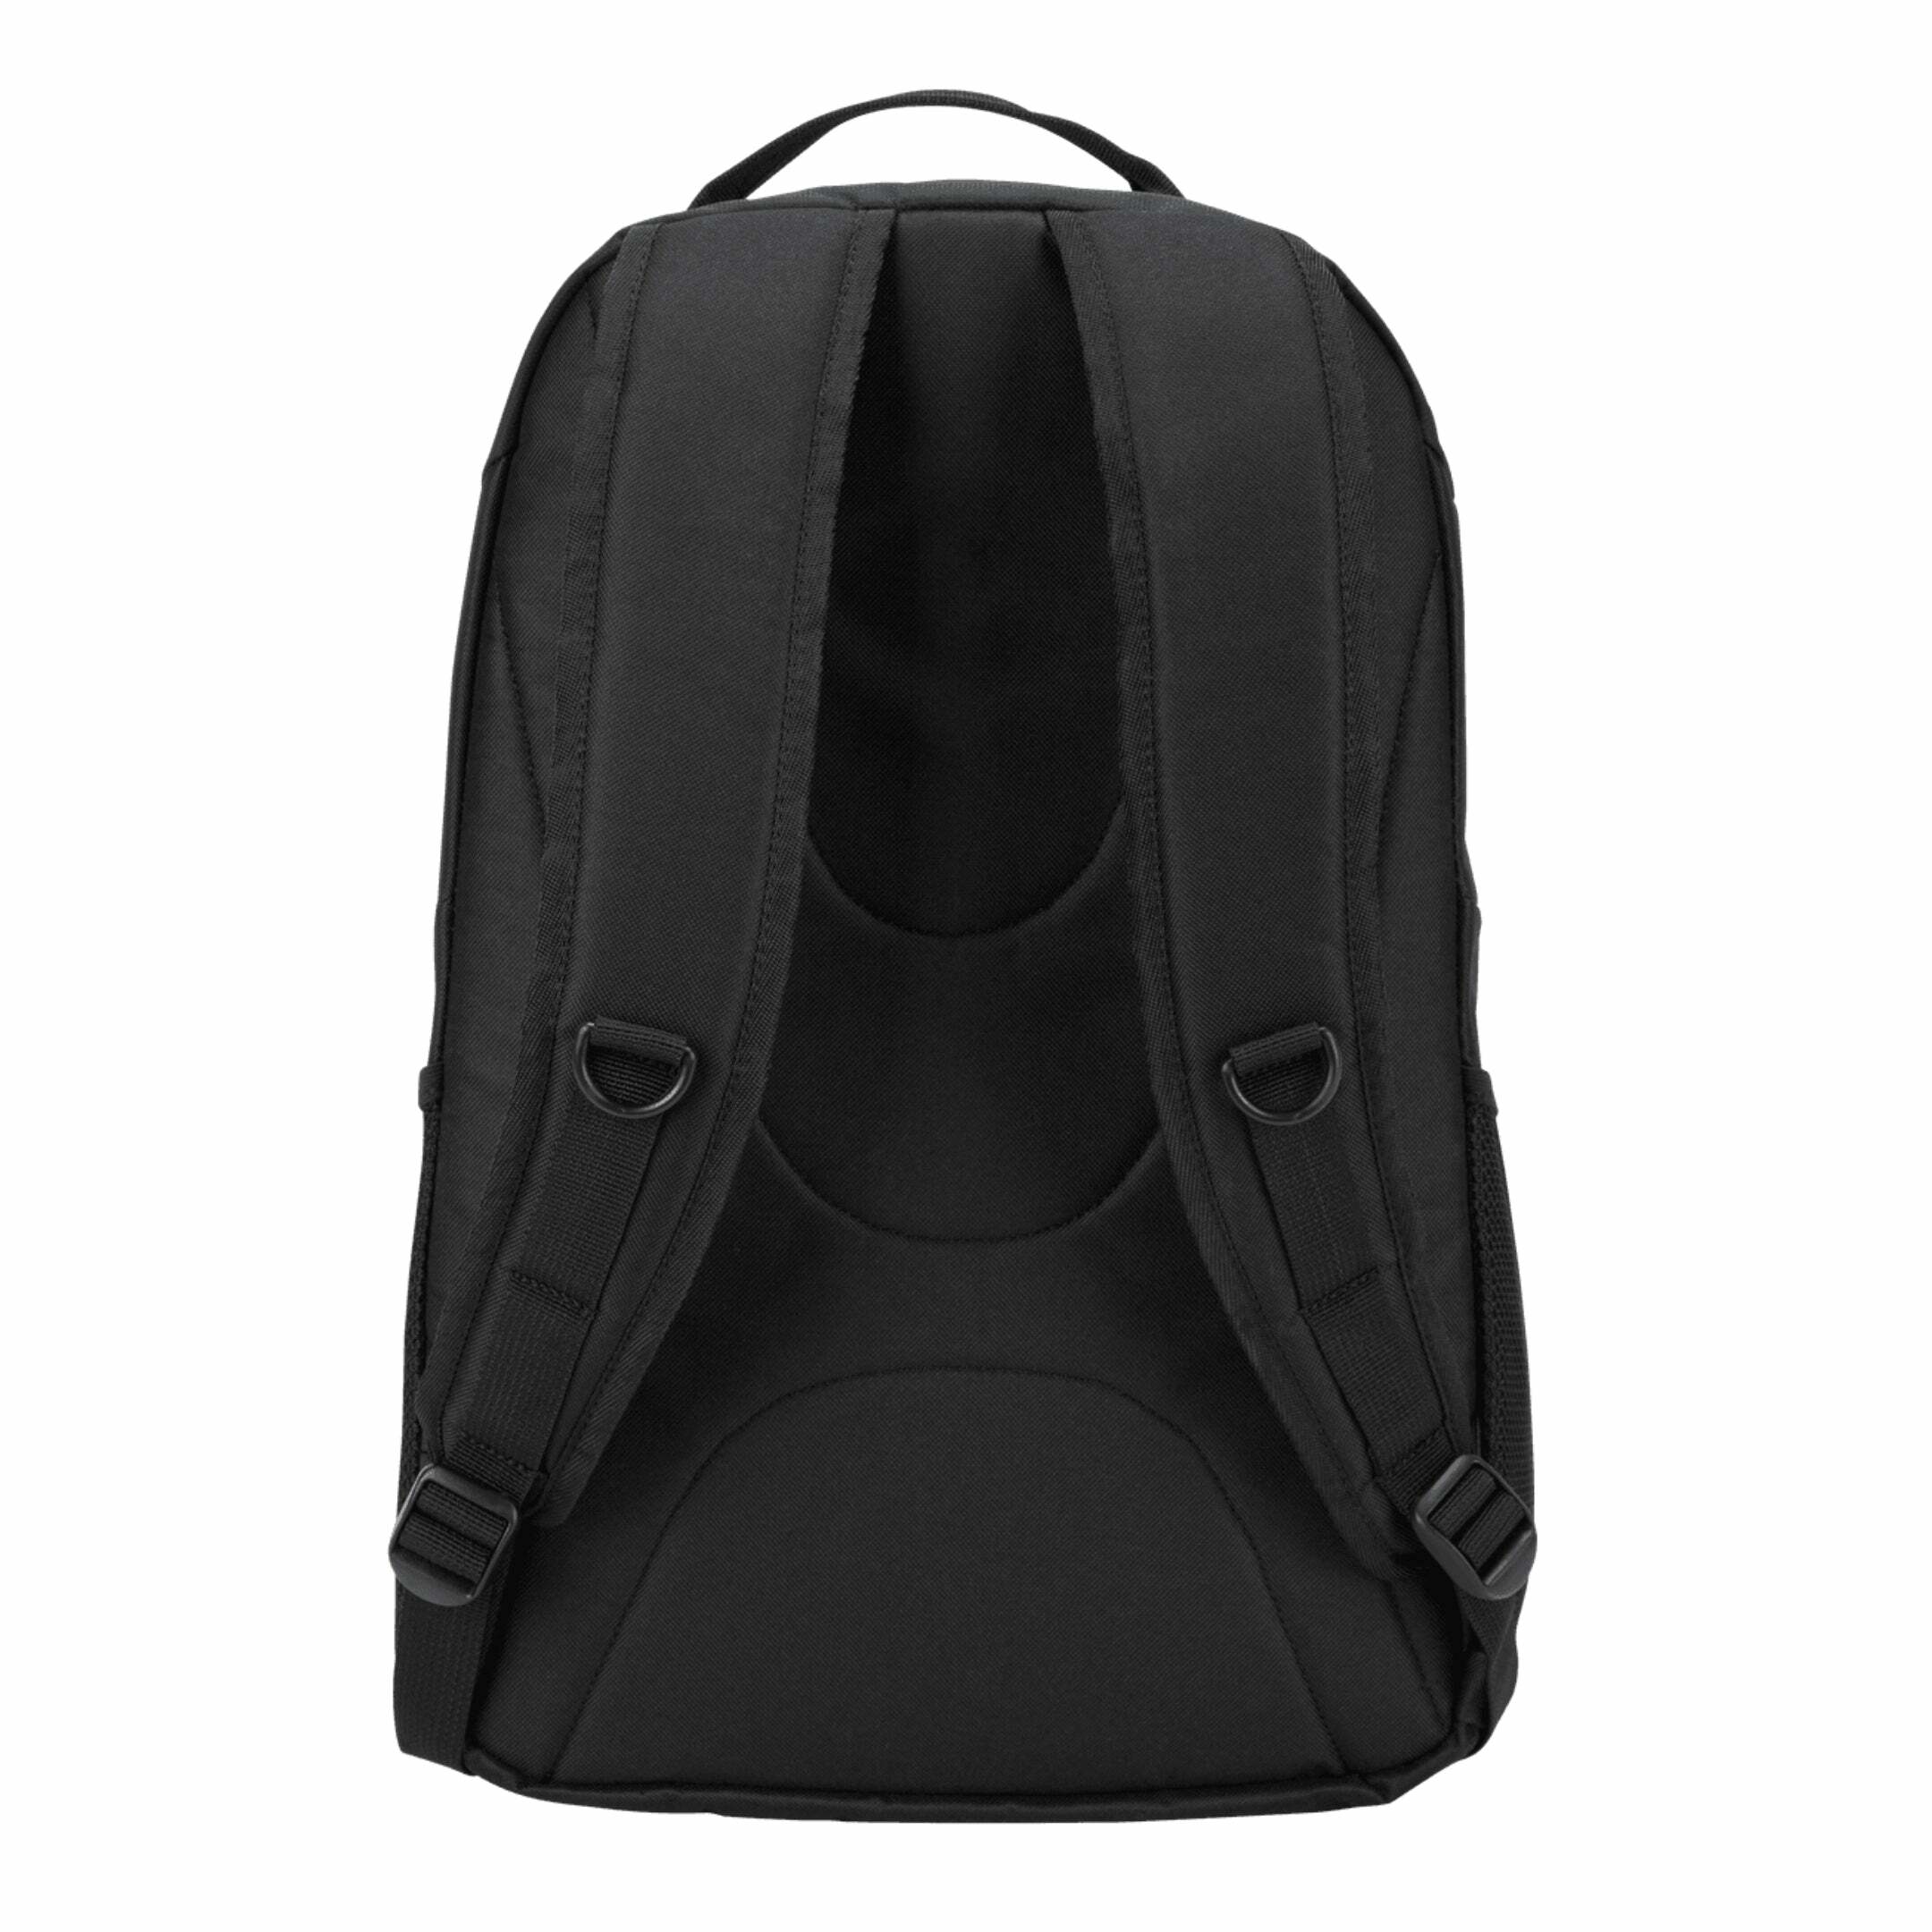 Targus Motor Series - 16-Inch Protective Laptop Backpack, Black with Stylish Accents